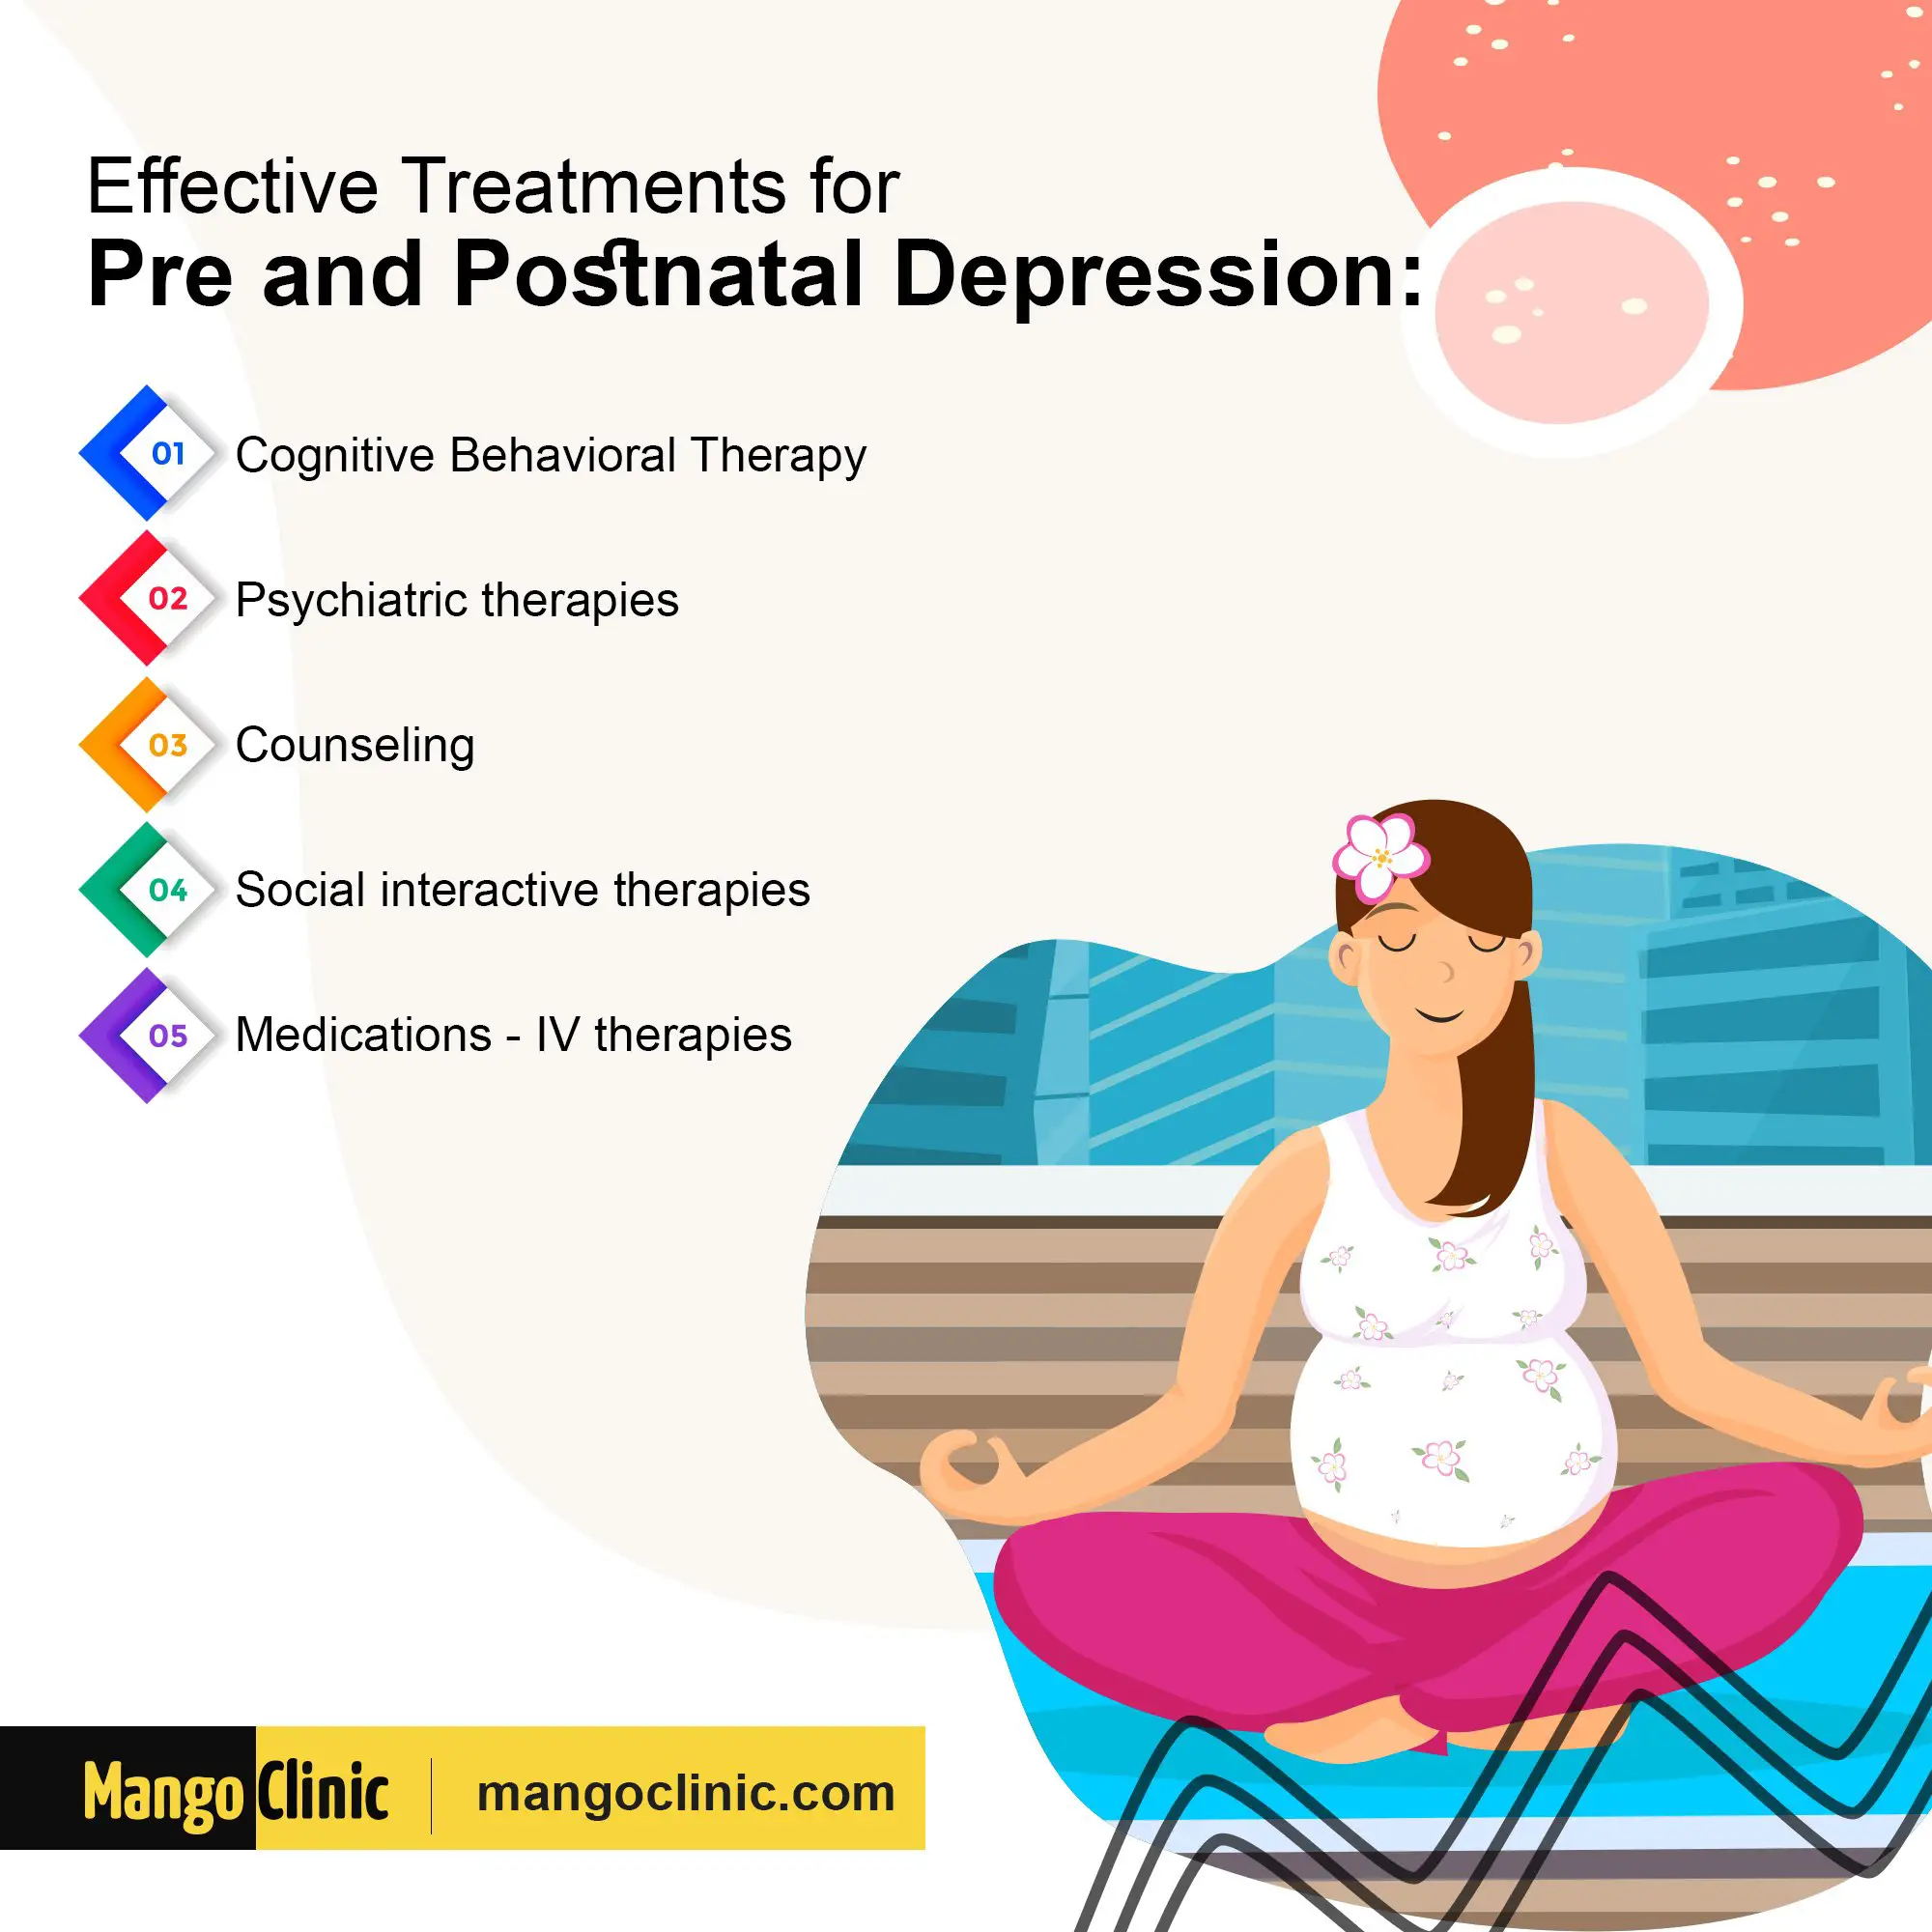 How to Deal with Depression During Pregnancy? · Mango Clinic